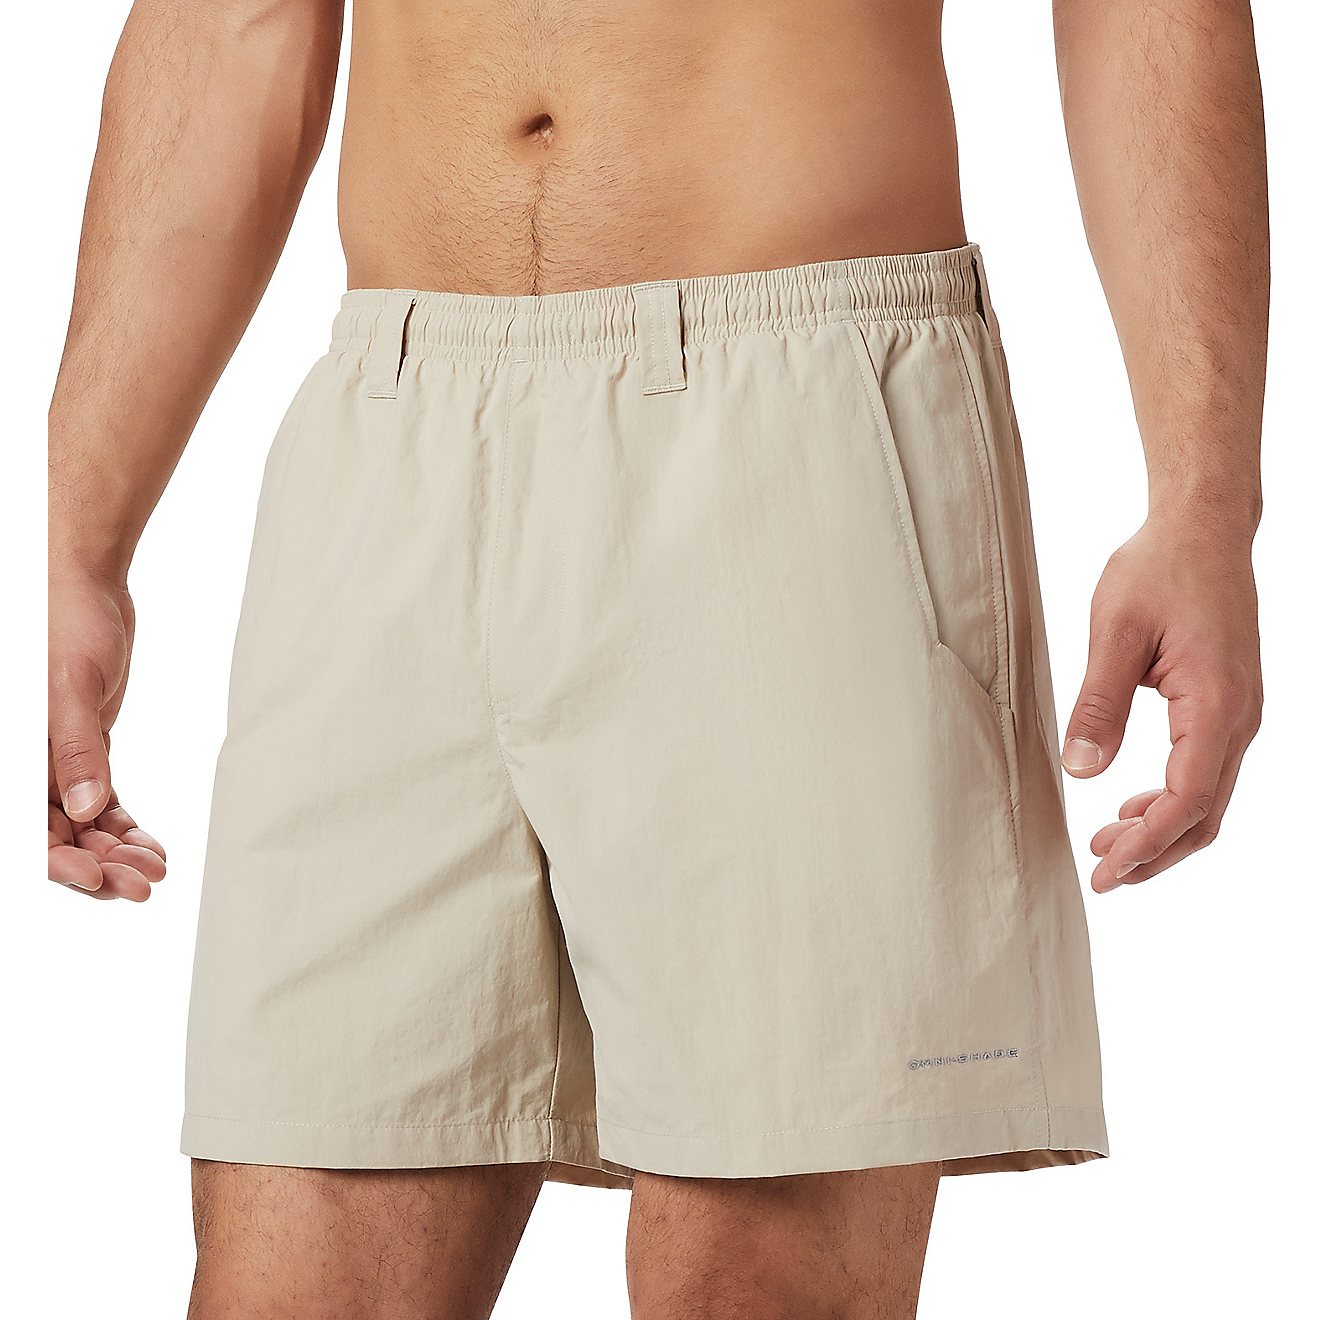 Columbia Sportswear Men's Backcast III Water Shorts 6 in                                                                         - view number 4